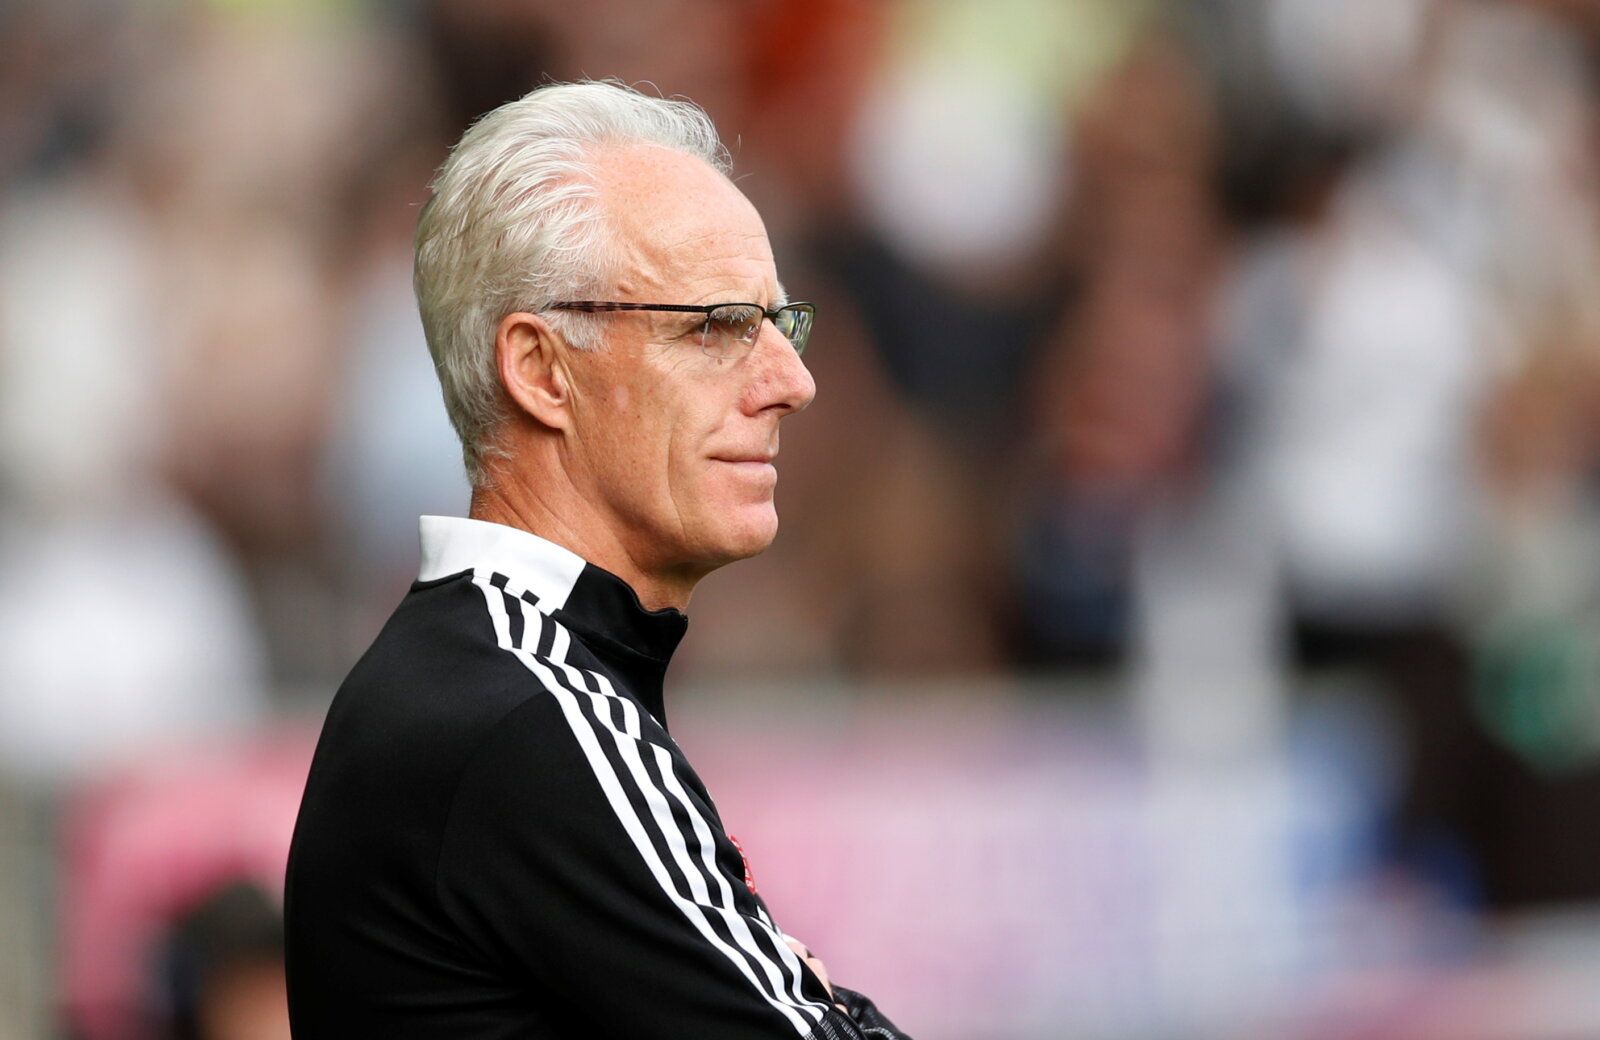 Soccer Football - Championship - Swansea City v Cardiff City - Liberty Stadium, Swansea, Wales, Britain - October 17, 2021  Cardiff City's head coach Mick McCarthy  Action Images/Andrew Boyers  EDITORIAL USE ONLY. No use with unauthorized audio, video, data, fixture lists, club/league logos or 